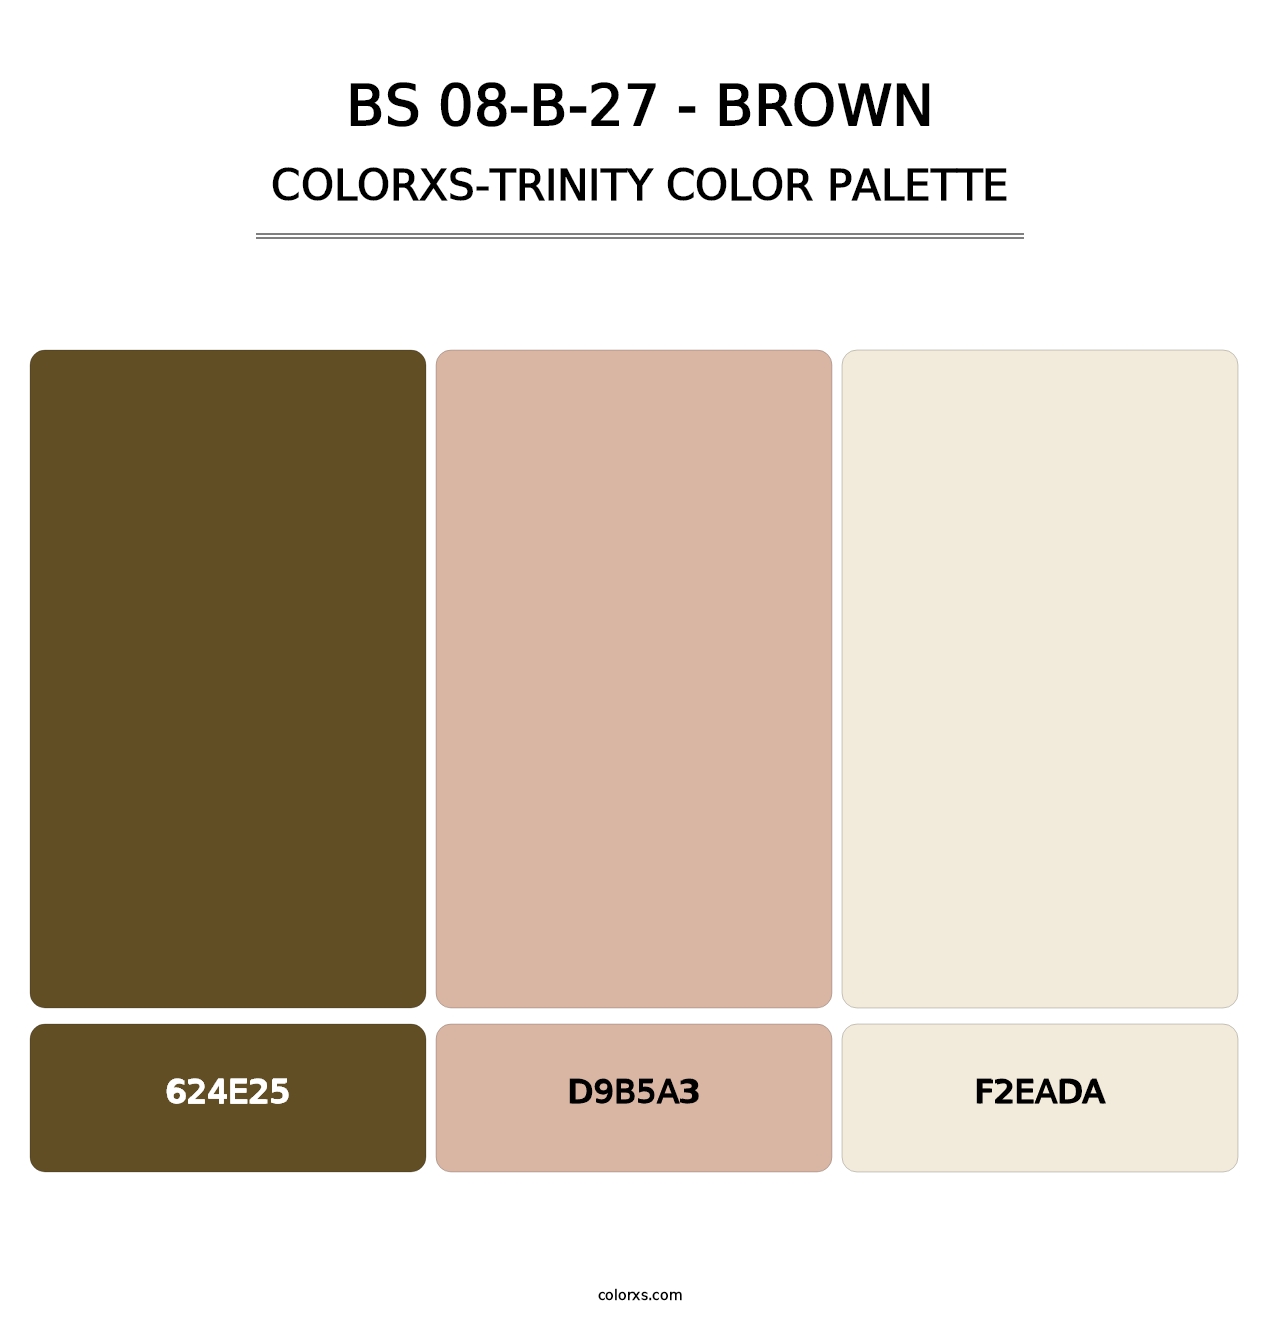 BS 08-B-27 - Brown - Colorxs Trinity Palette